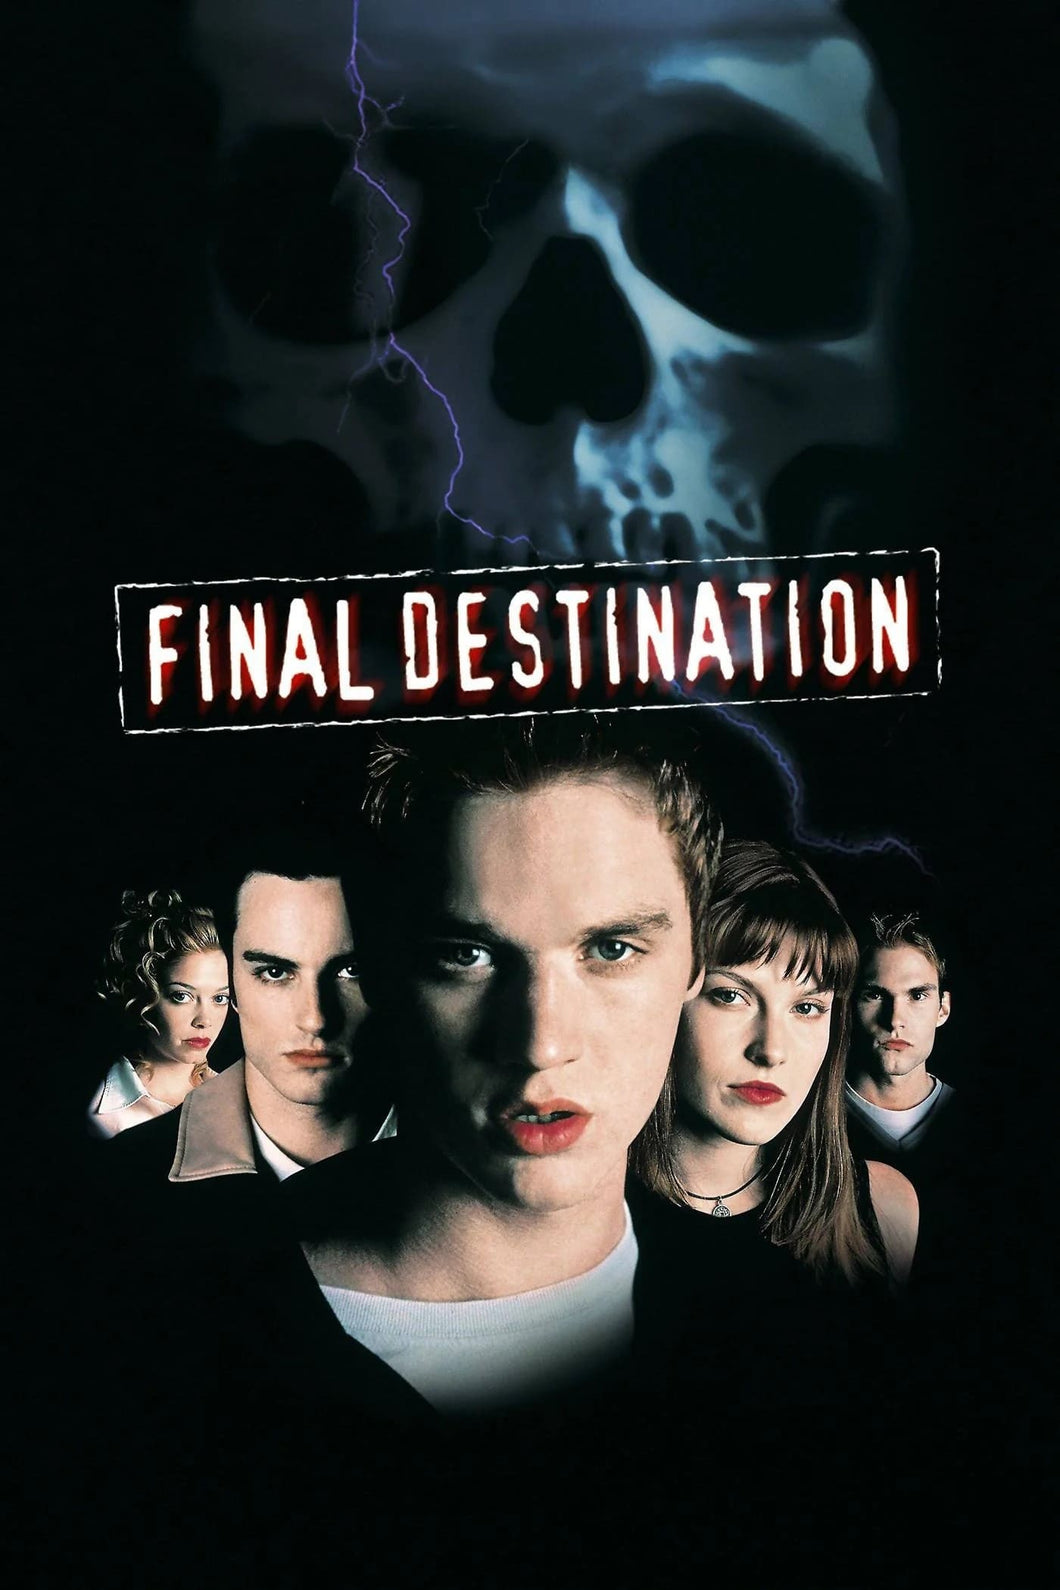 Final Destination (2000) Movie Poster High Quality Glossy Paper A1 A2 A3 A4 A3 Framed or Unframed!!!